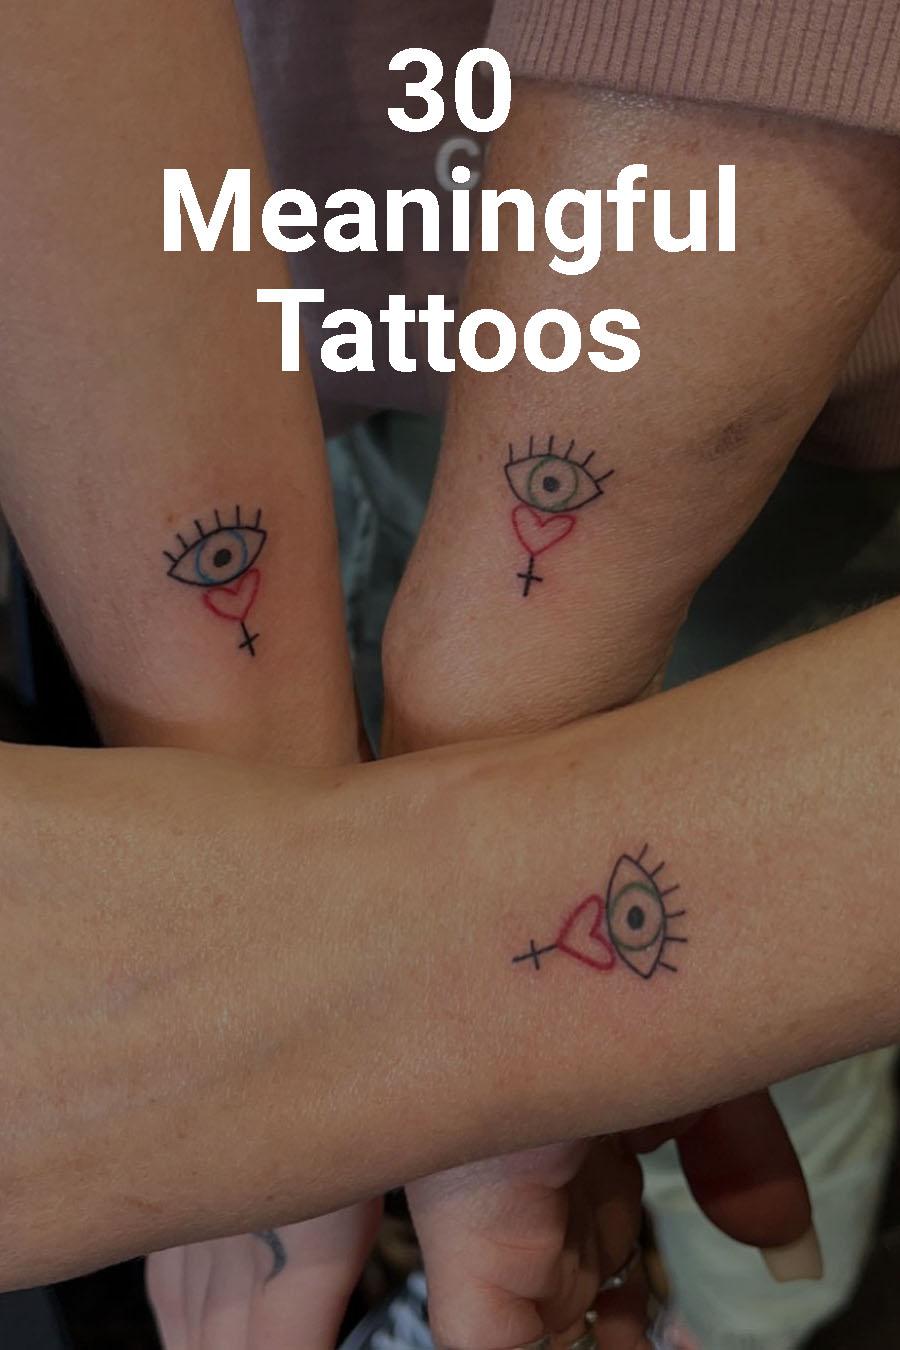 31 Meaningful Tattoo Ideas That Speak to What Really Matters | FamilyMinded